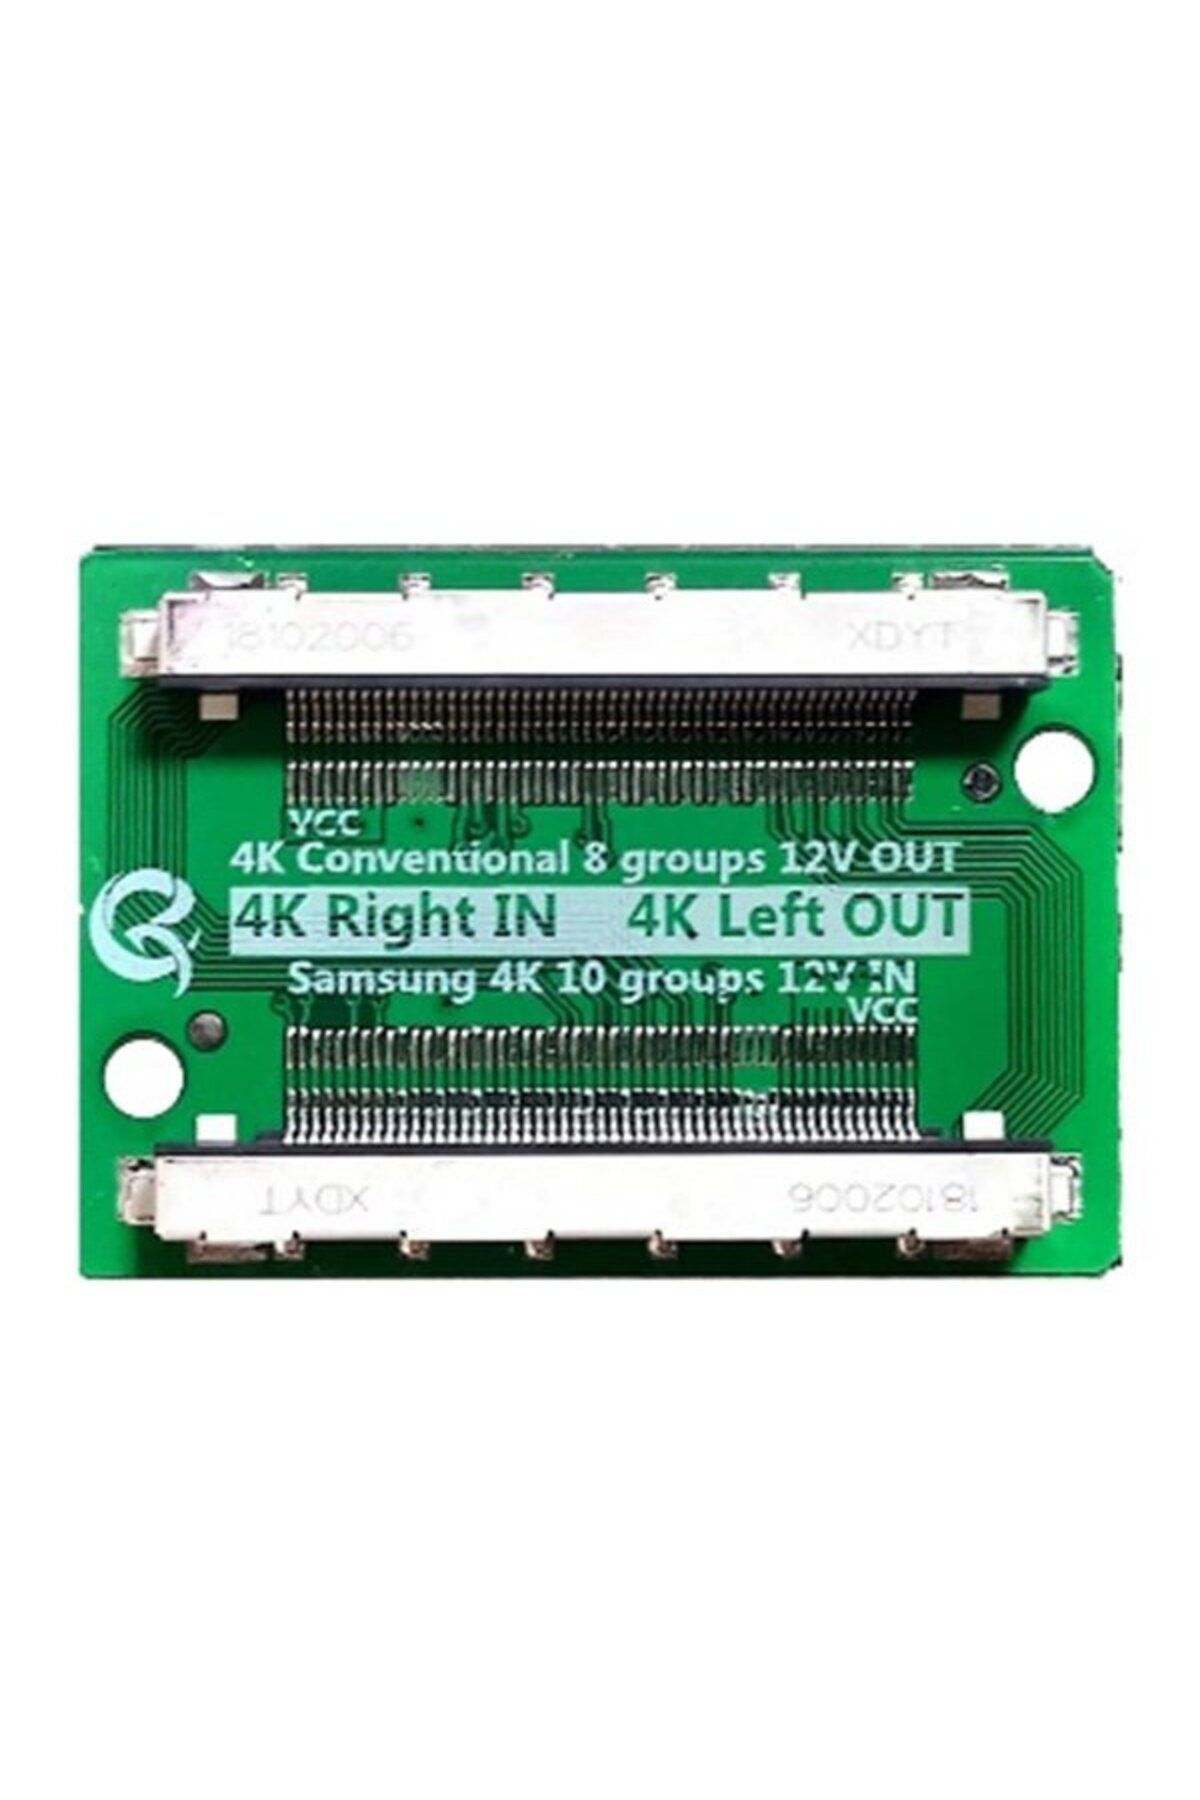 KAYAMU LCD PANEL FLEXİ REPAİR KART 4K RİGHT İN 4K LEFT OUT LVDS TO LVDS QK0822A (81) (K0)